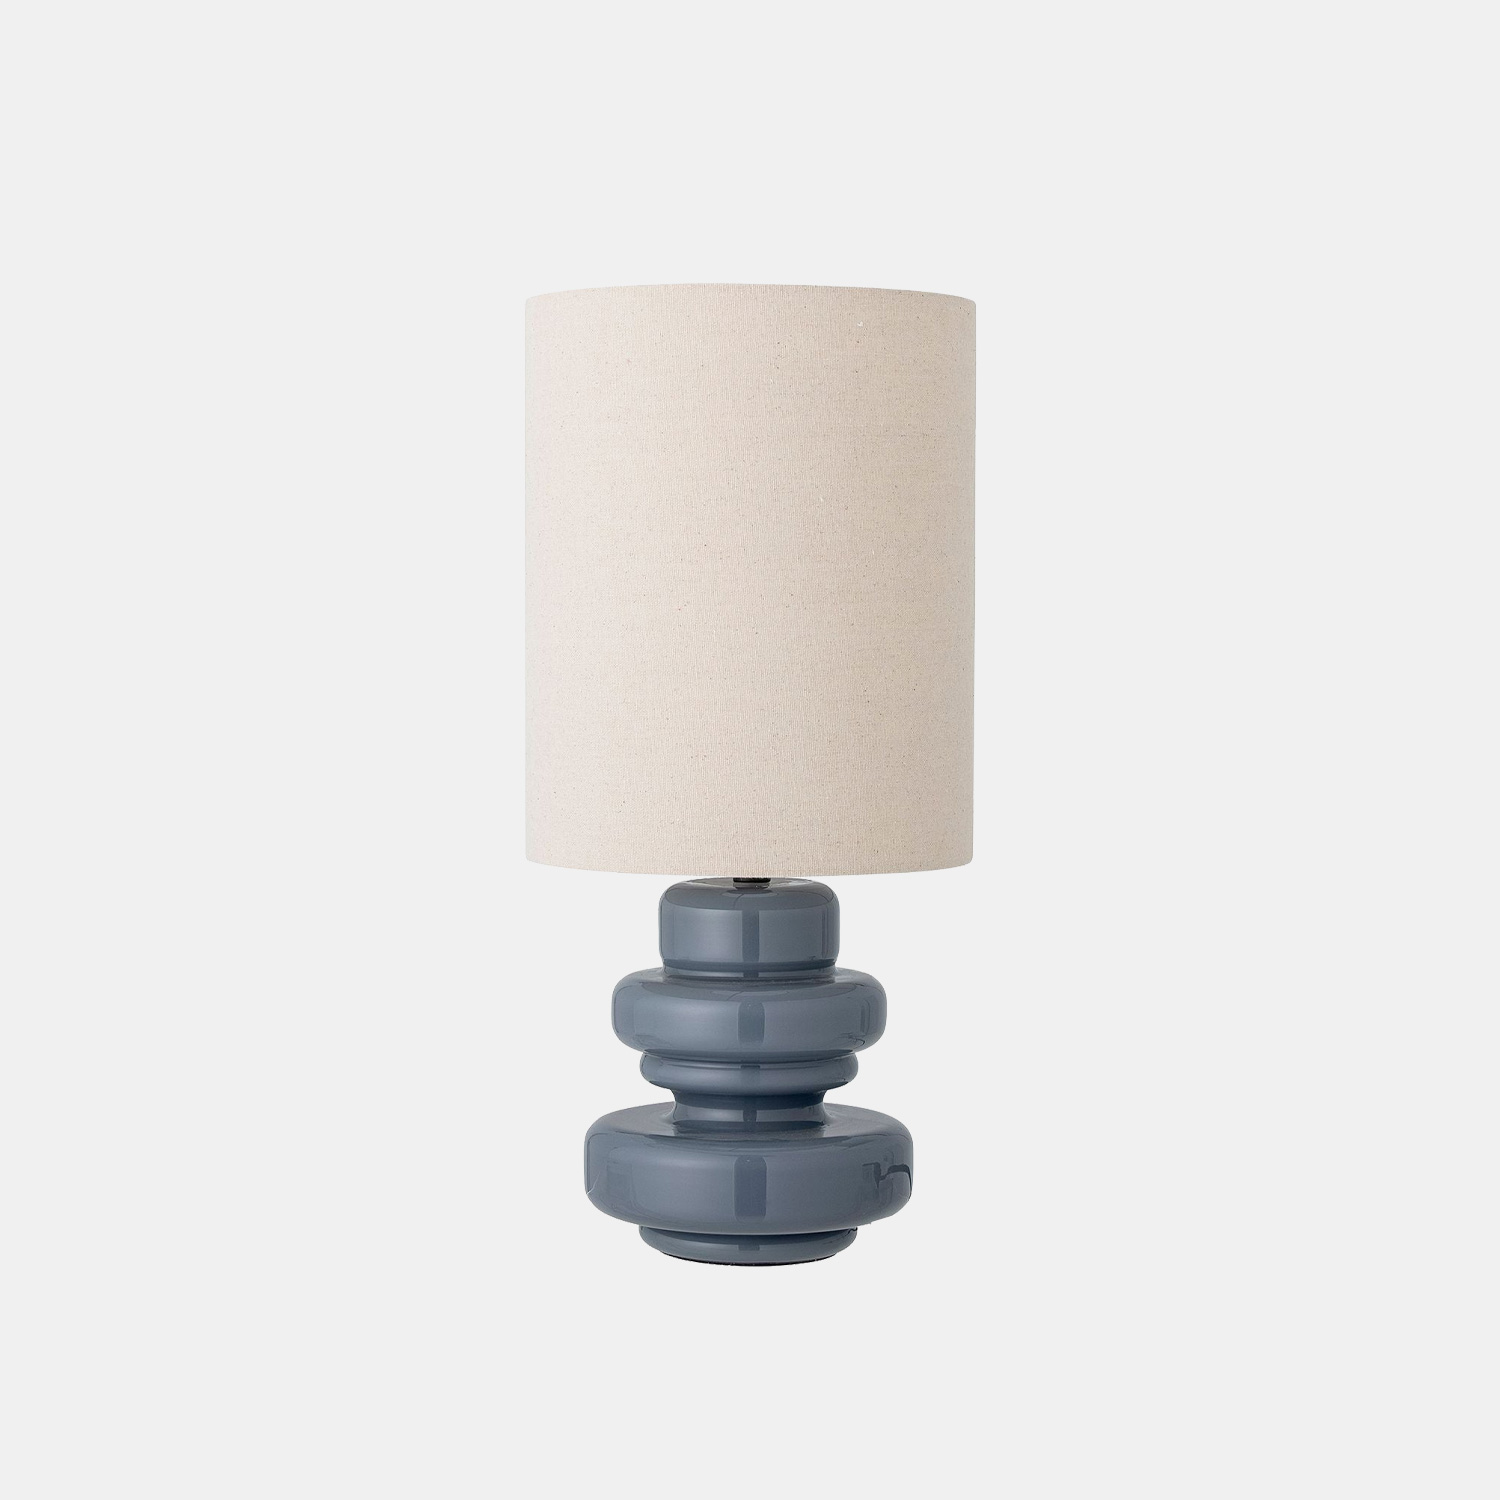 Shop Our Lamps & Lighting Collection Online